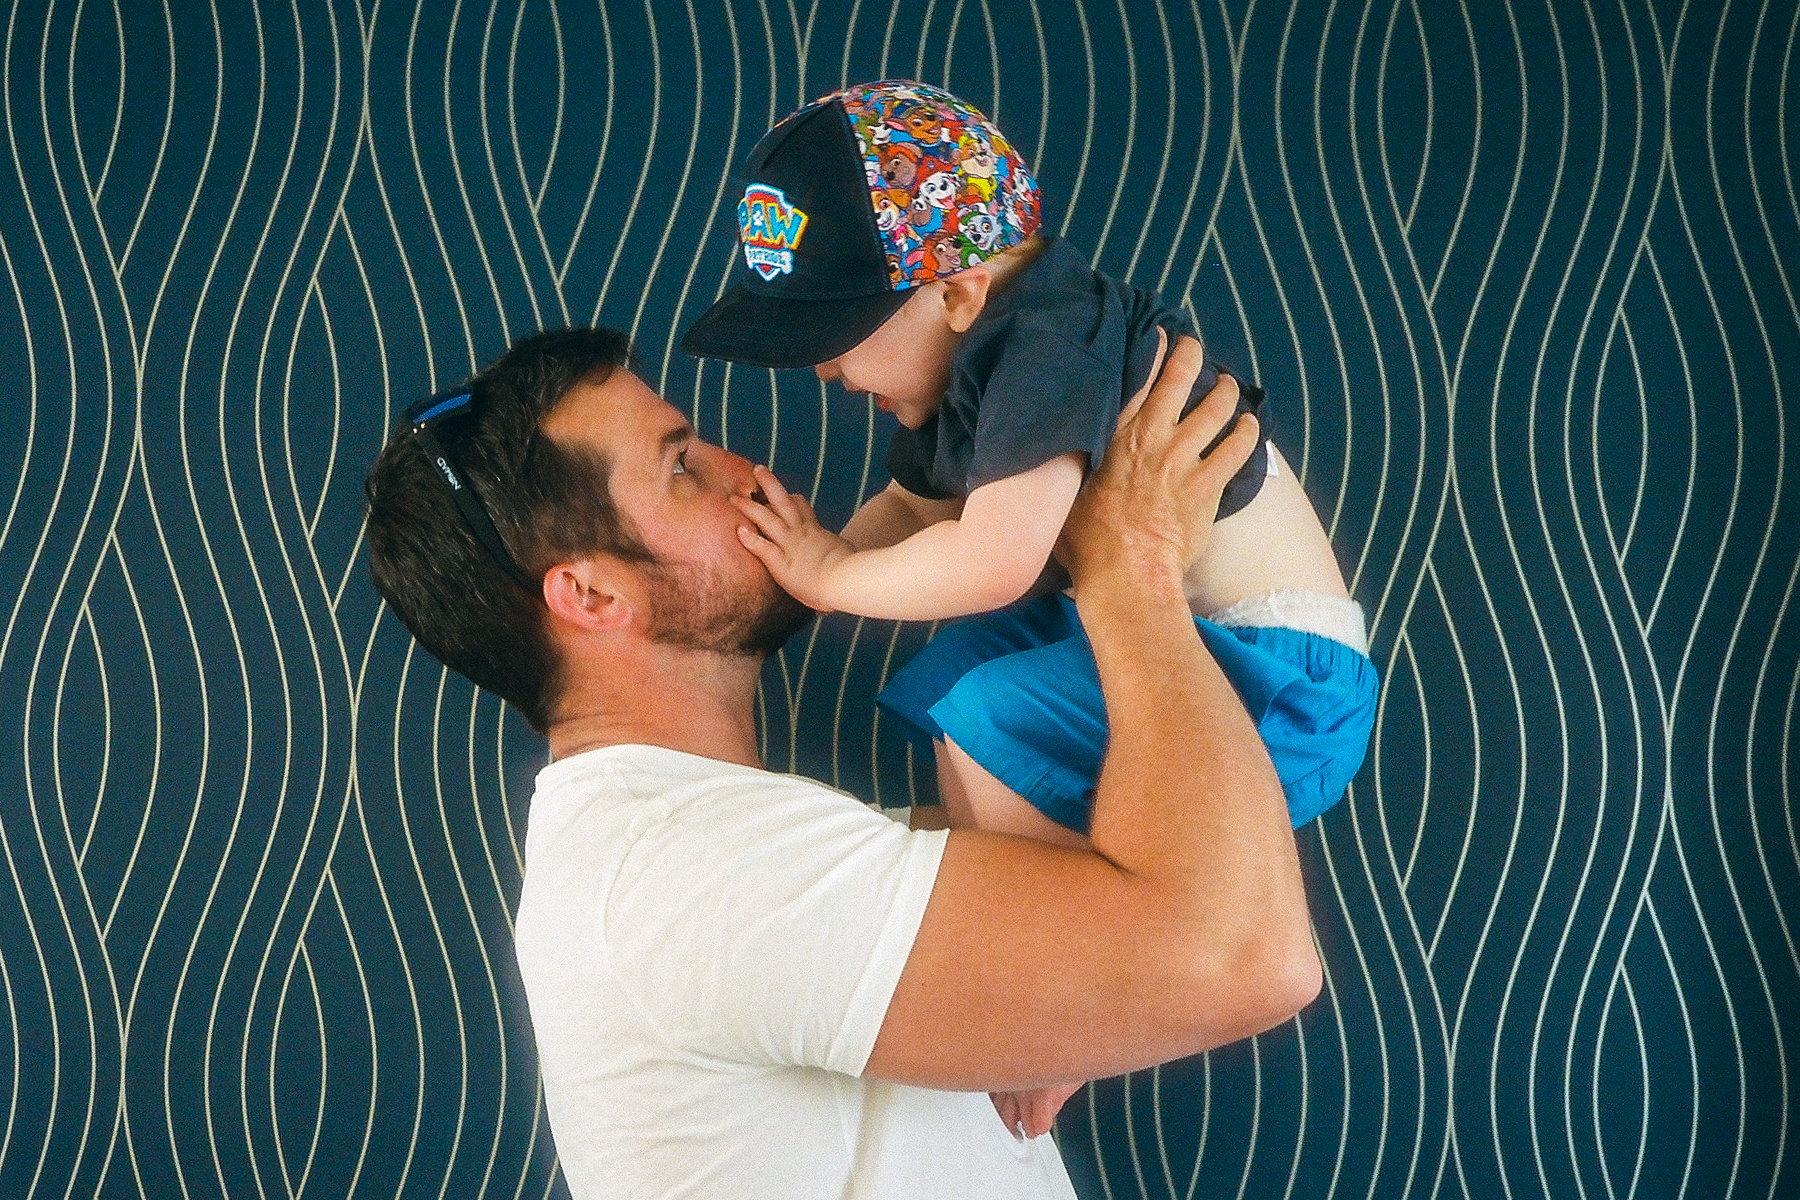 A photo of father Mark holding up his young son; they are against a navy and gold wallpaper backdrop; Mark's son's hands are on his mouth and Mark is making a silly face whilst his son giggles